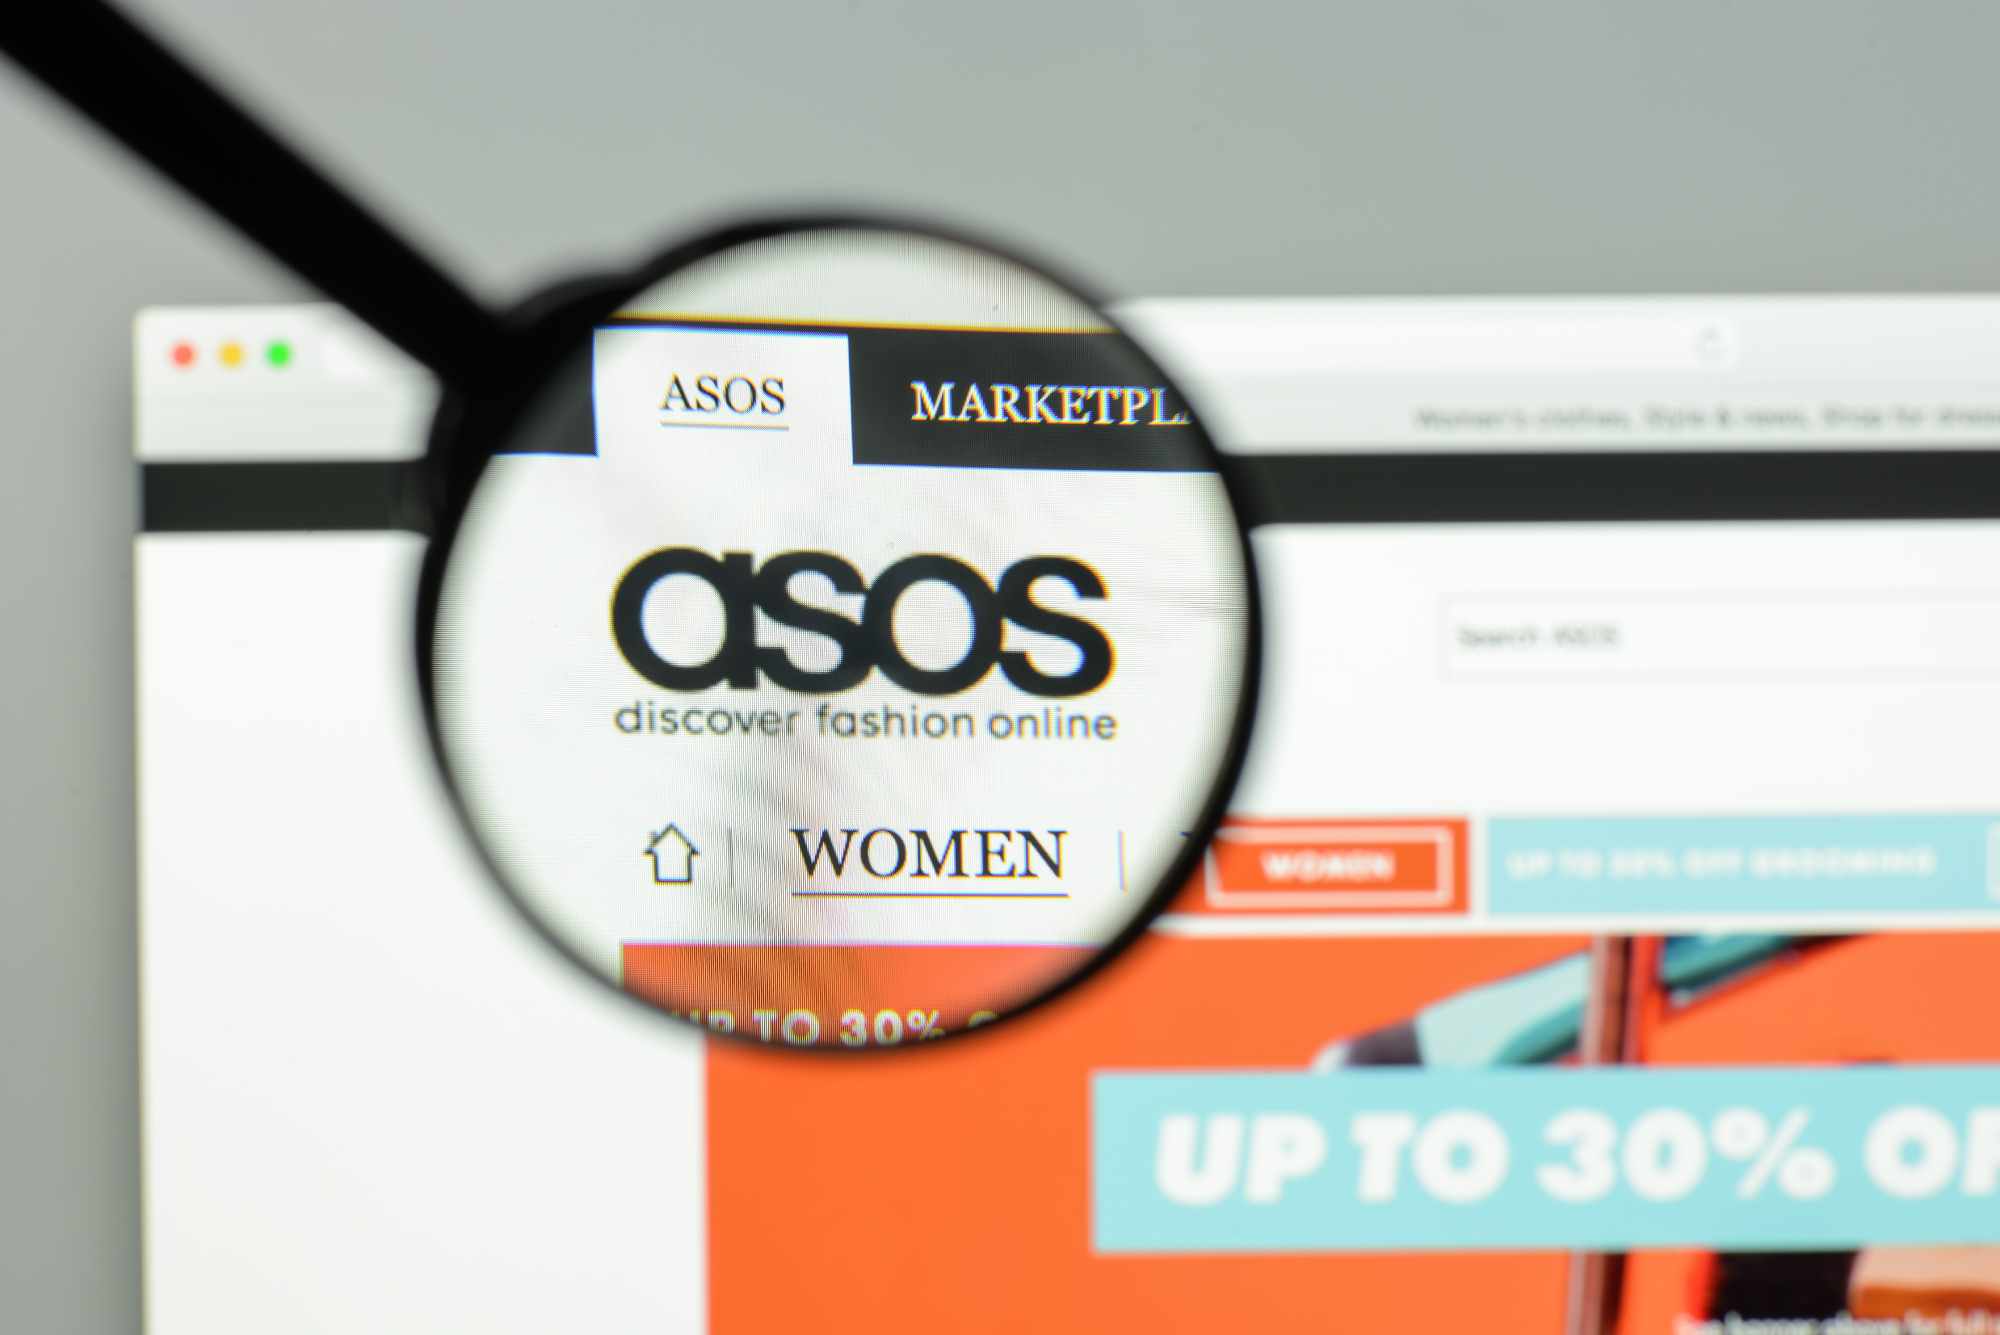 asos website with a magnifying glass over the asos logo